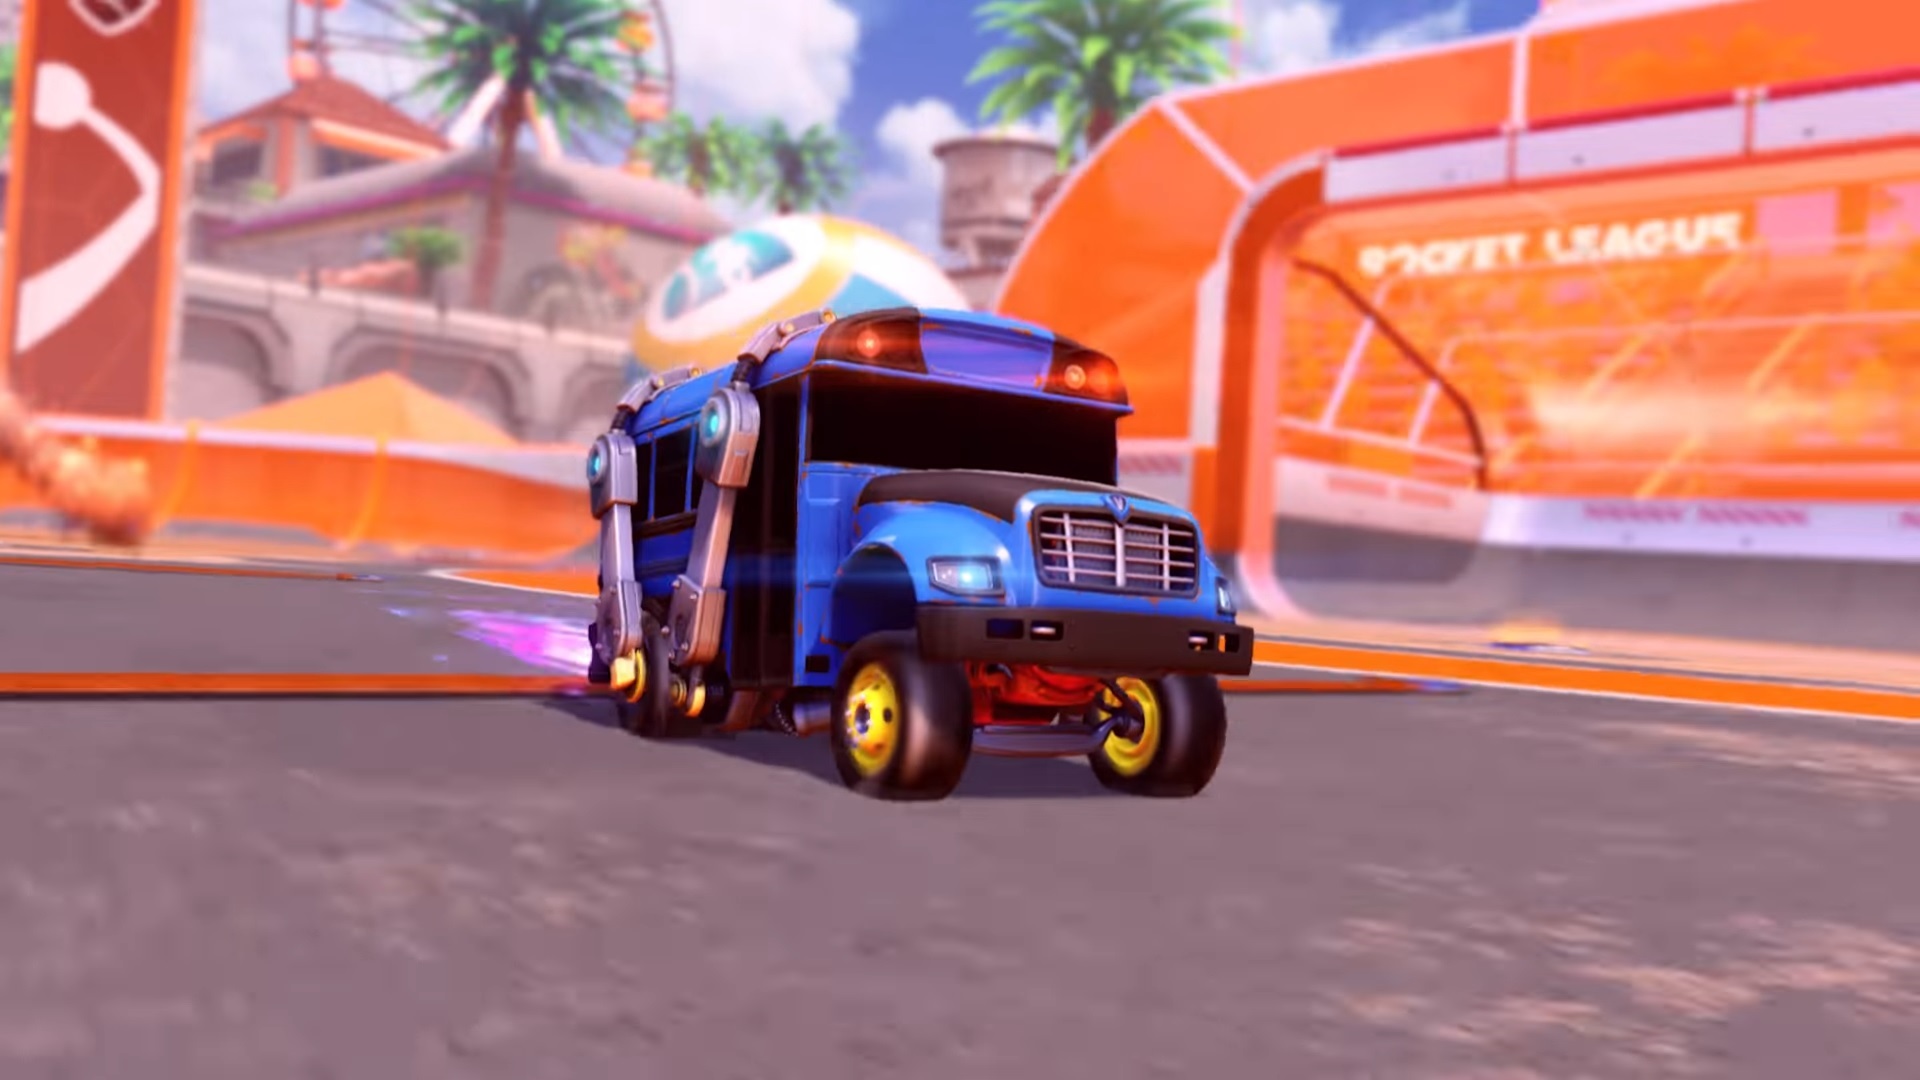  Rocket League and Fortnite collide in crossover events starting this weekend 